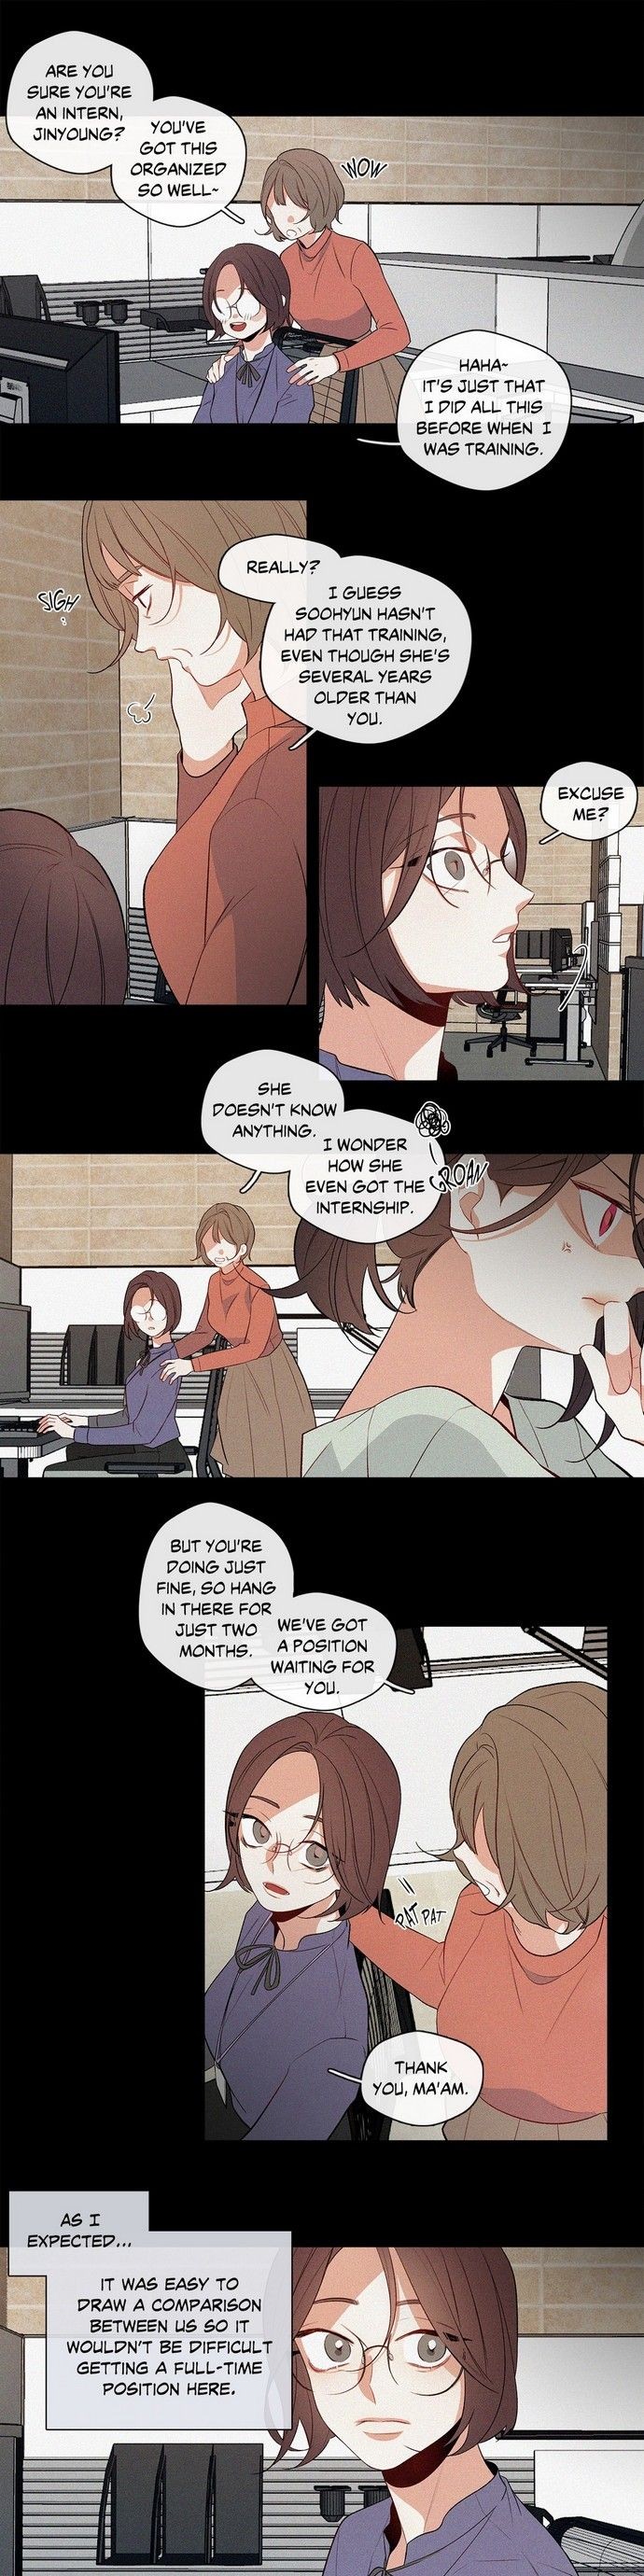 Two Birds in Spring - Chapter 56 Page 2